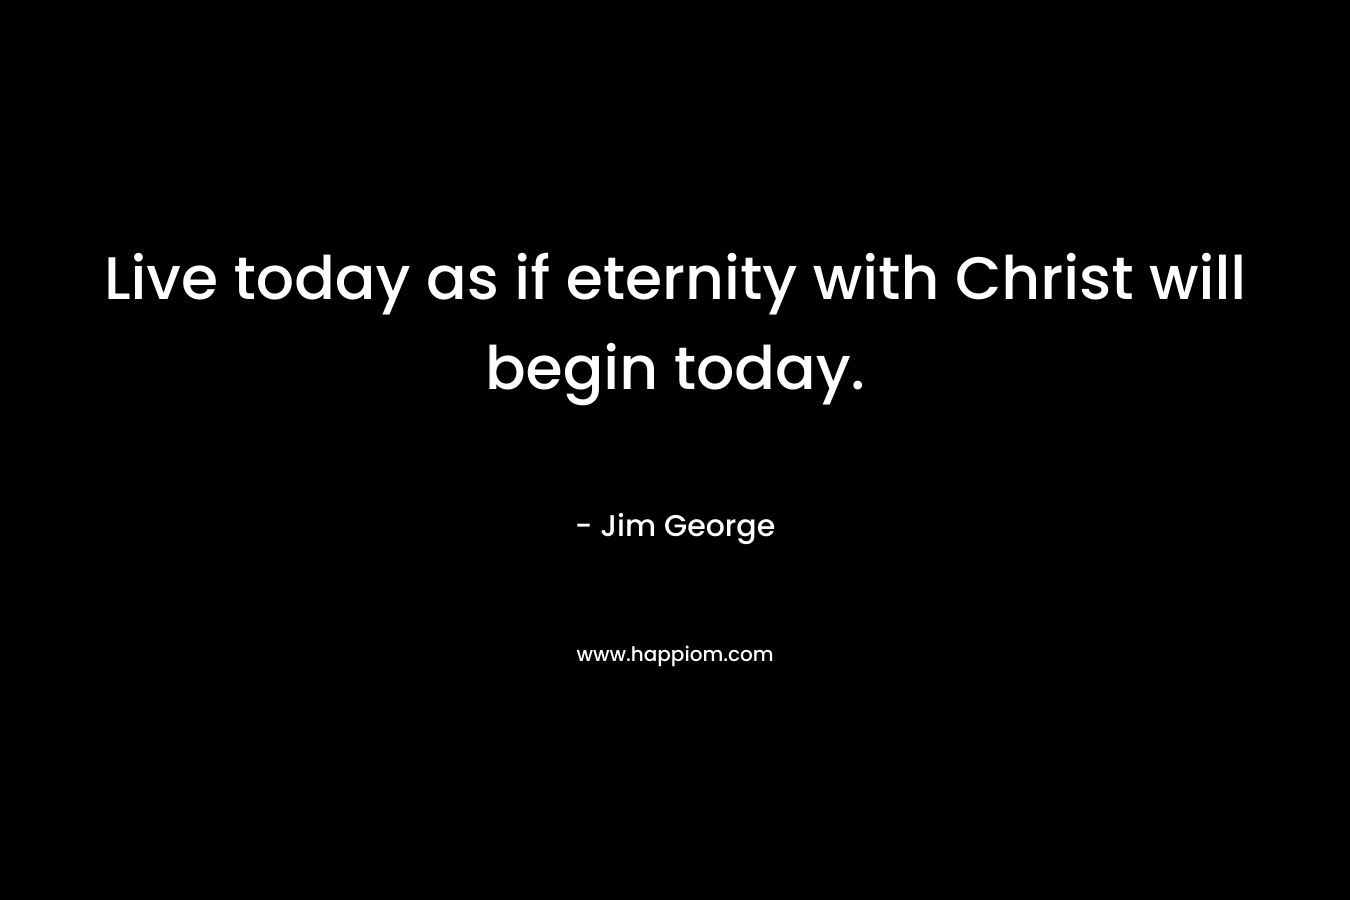 Live today as if eternity with Christ will begin today.